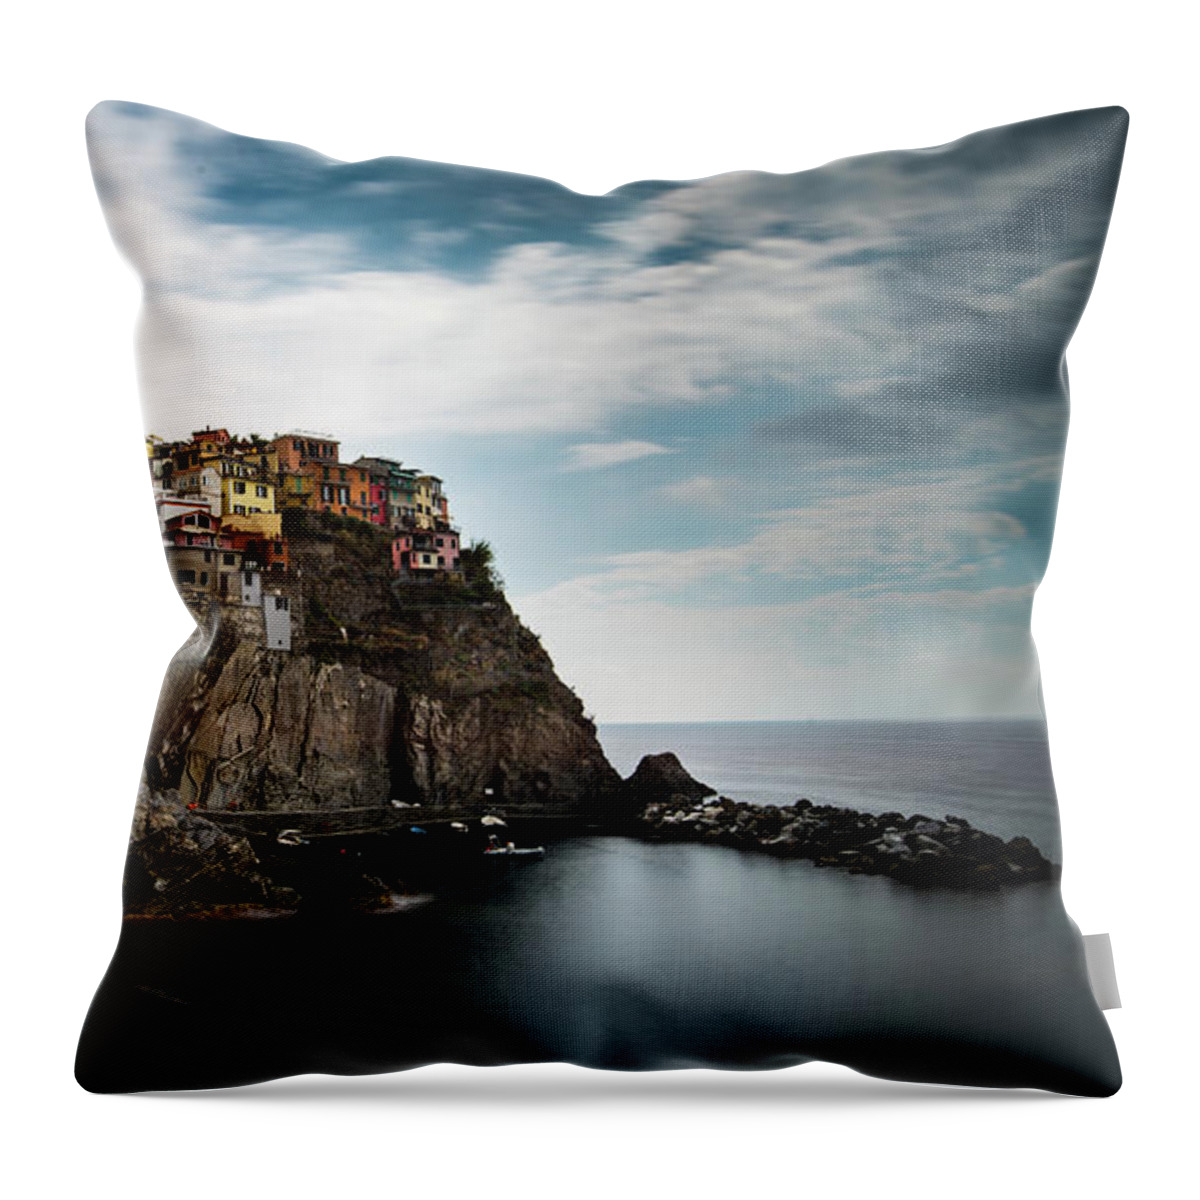 Michalakis Ppalis Throw Pillow featuring the photograph Village of Manarola CinqueTerre, Liguria, Italy by Michalakis Ppalis